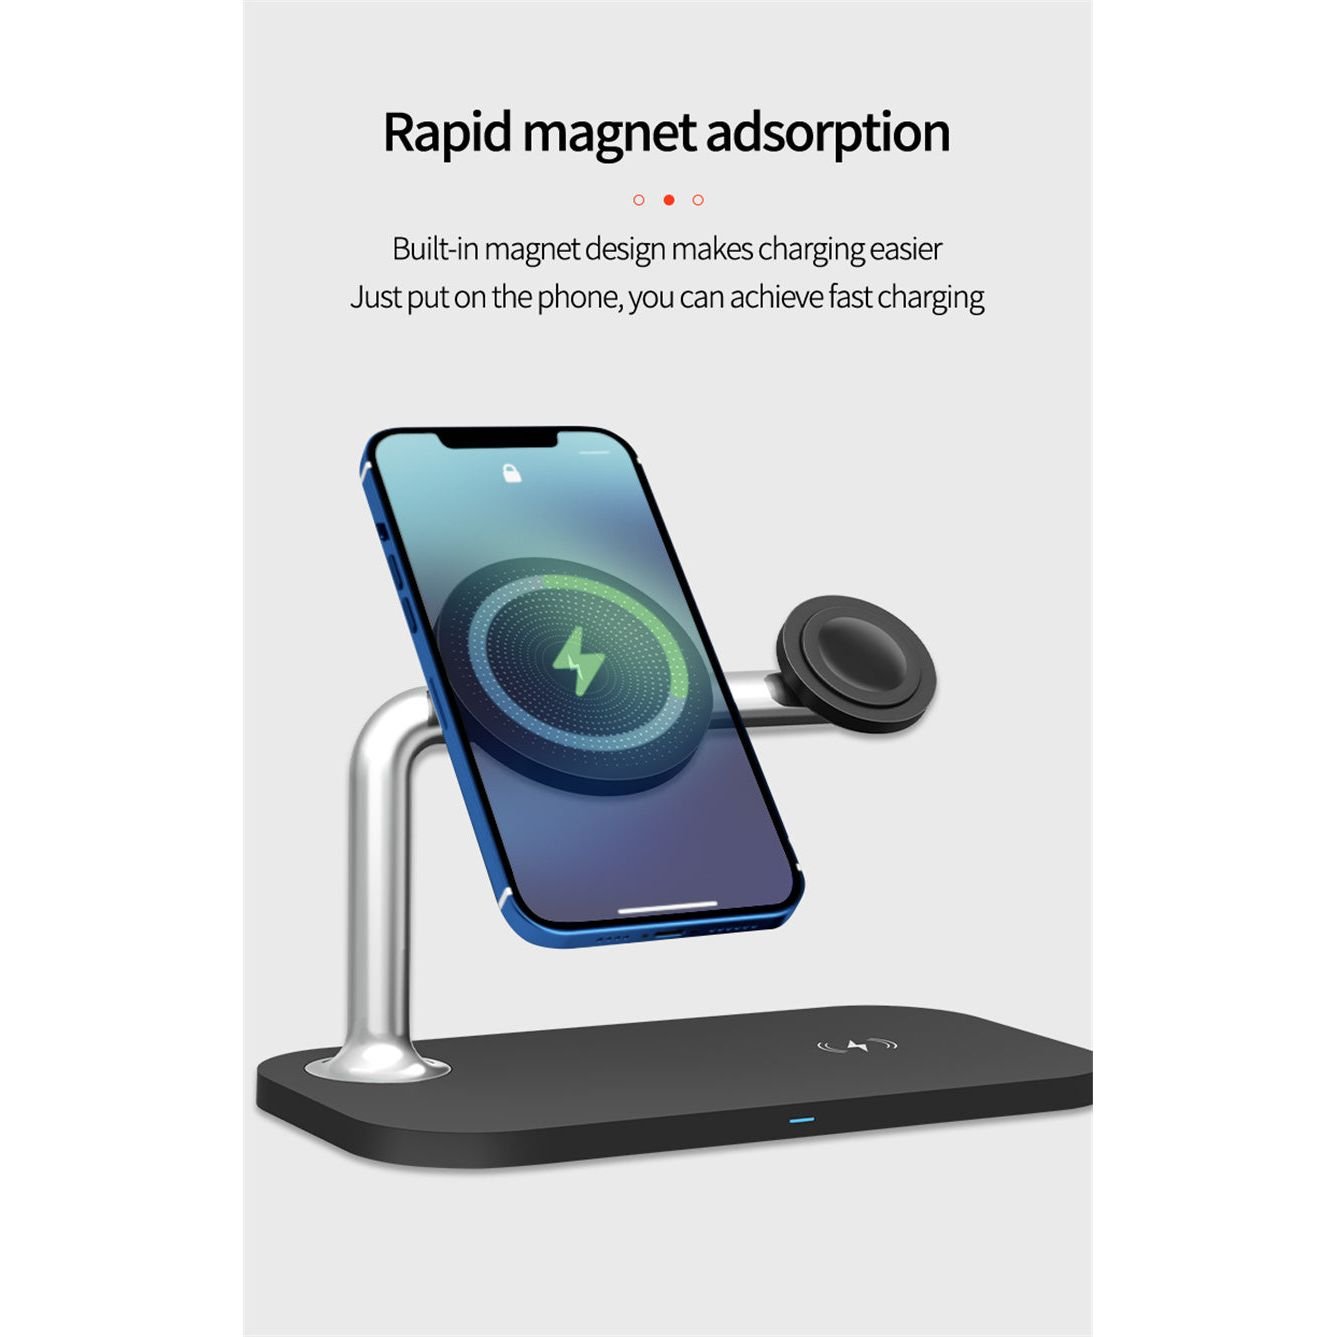 3-in-1 Wireless Charger with MagSafe Compatibility